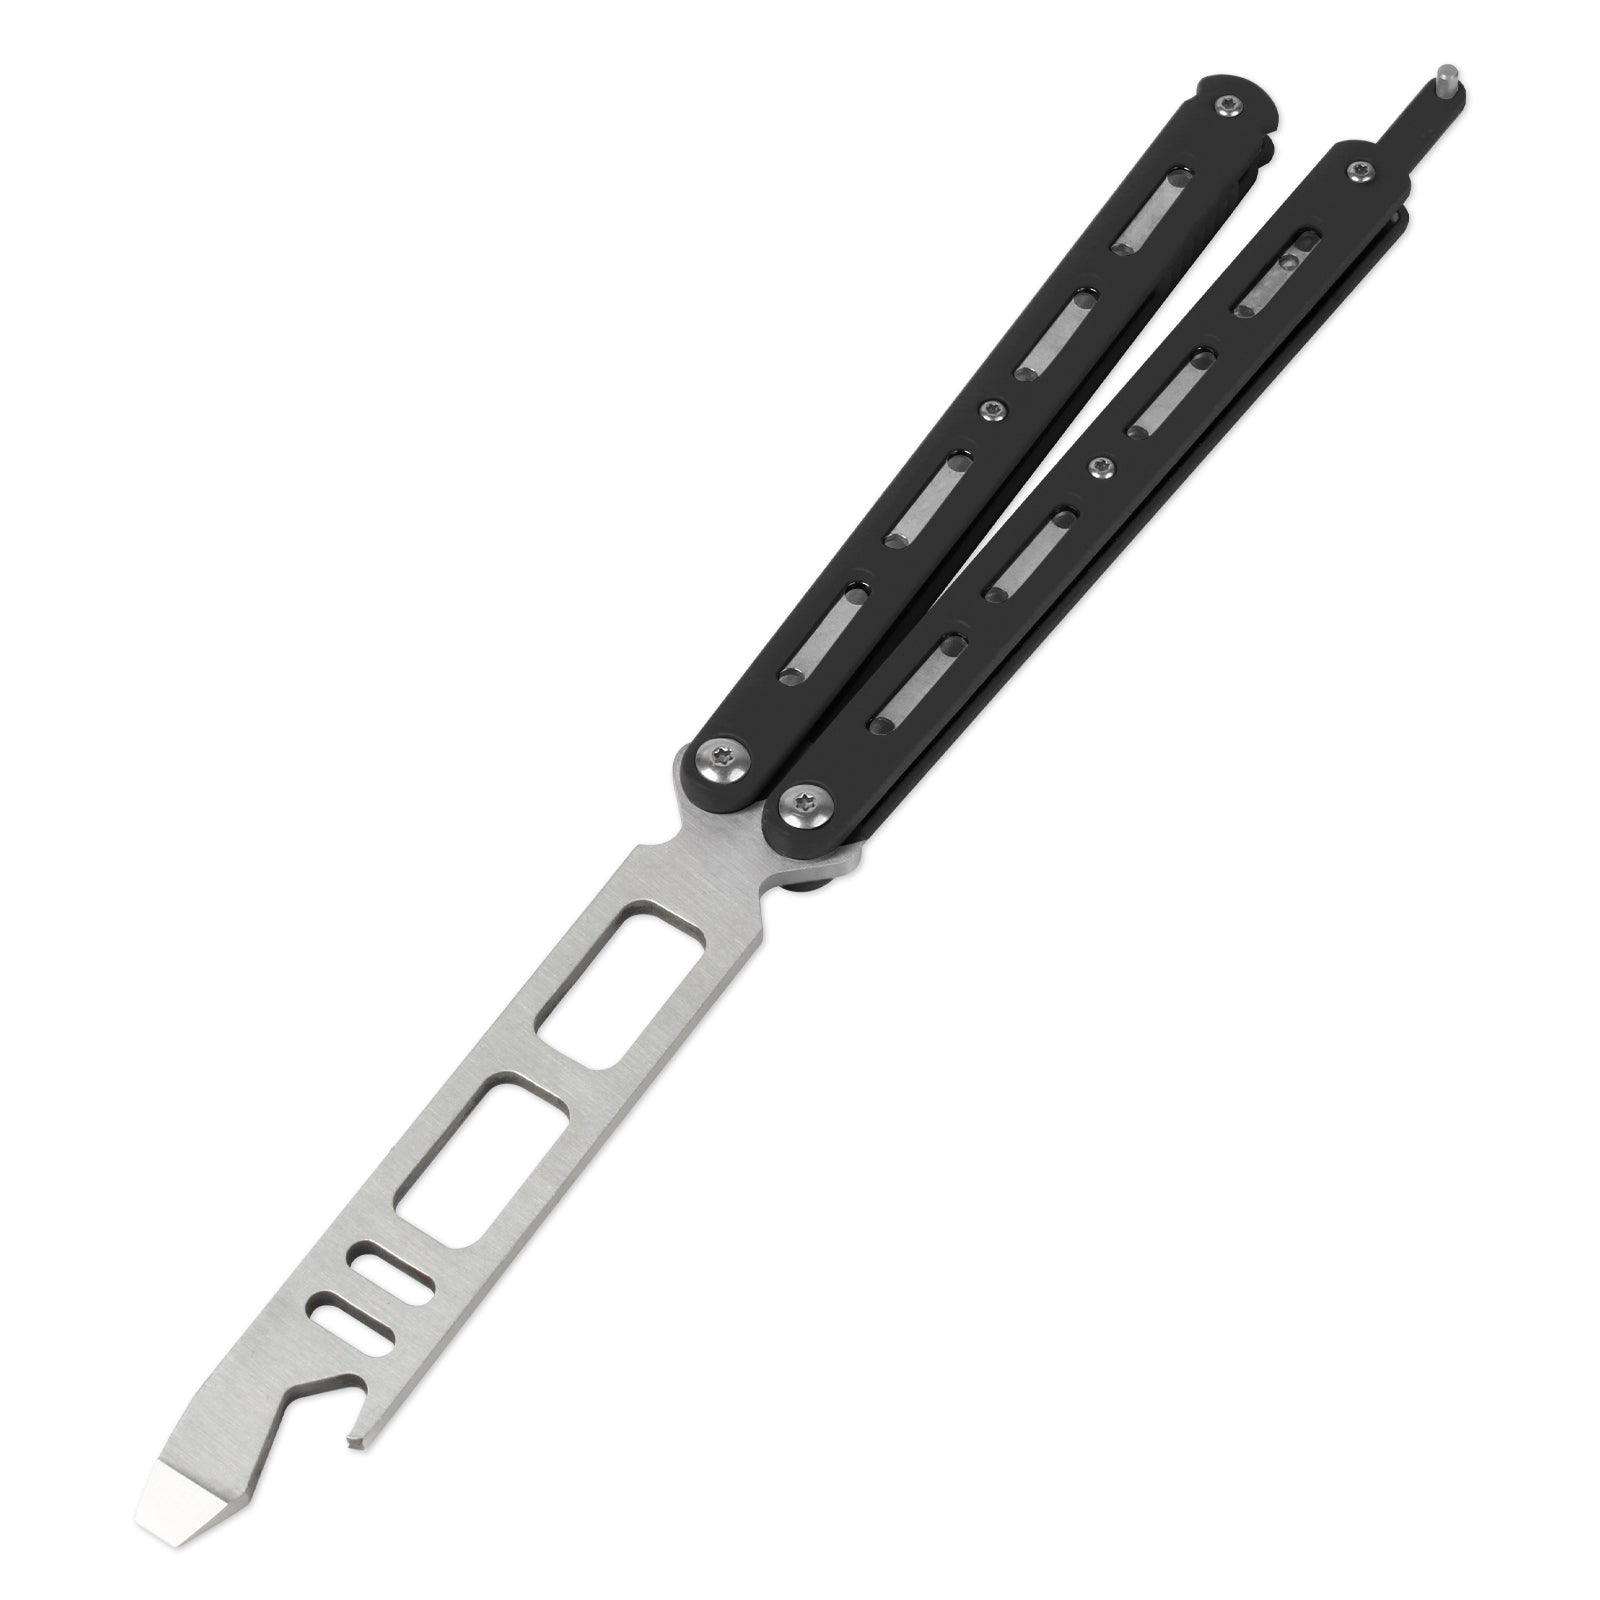 Andux Balisong Butterfly Knife Bottle Opener Stainless Steel Carry-on Folding Multitool BLCS551